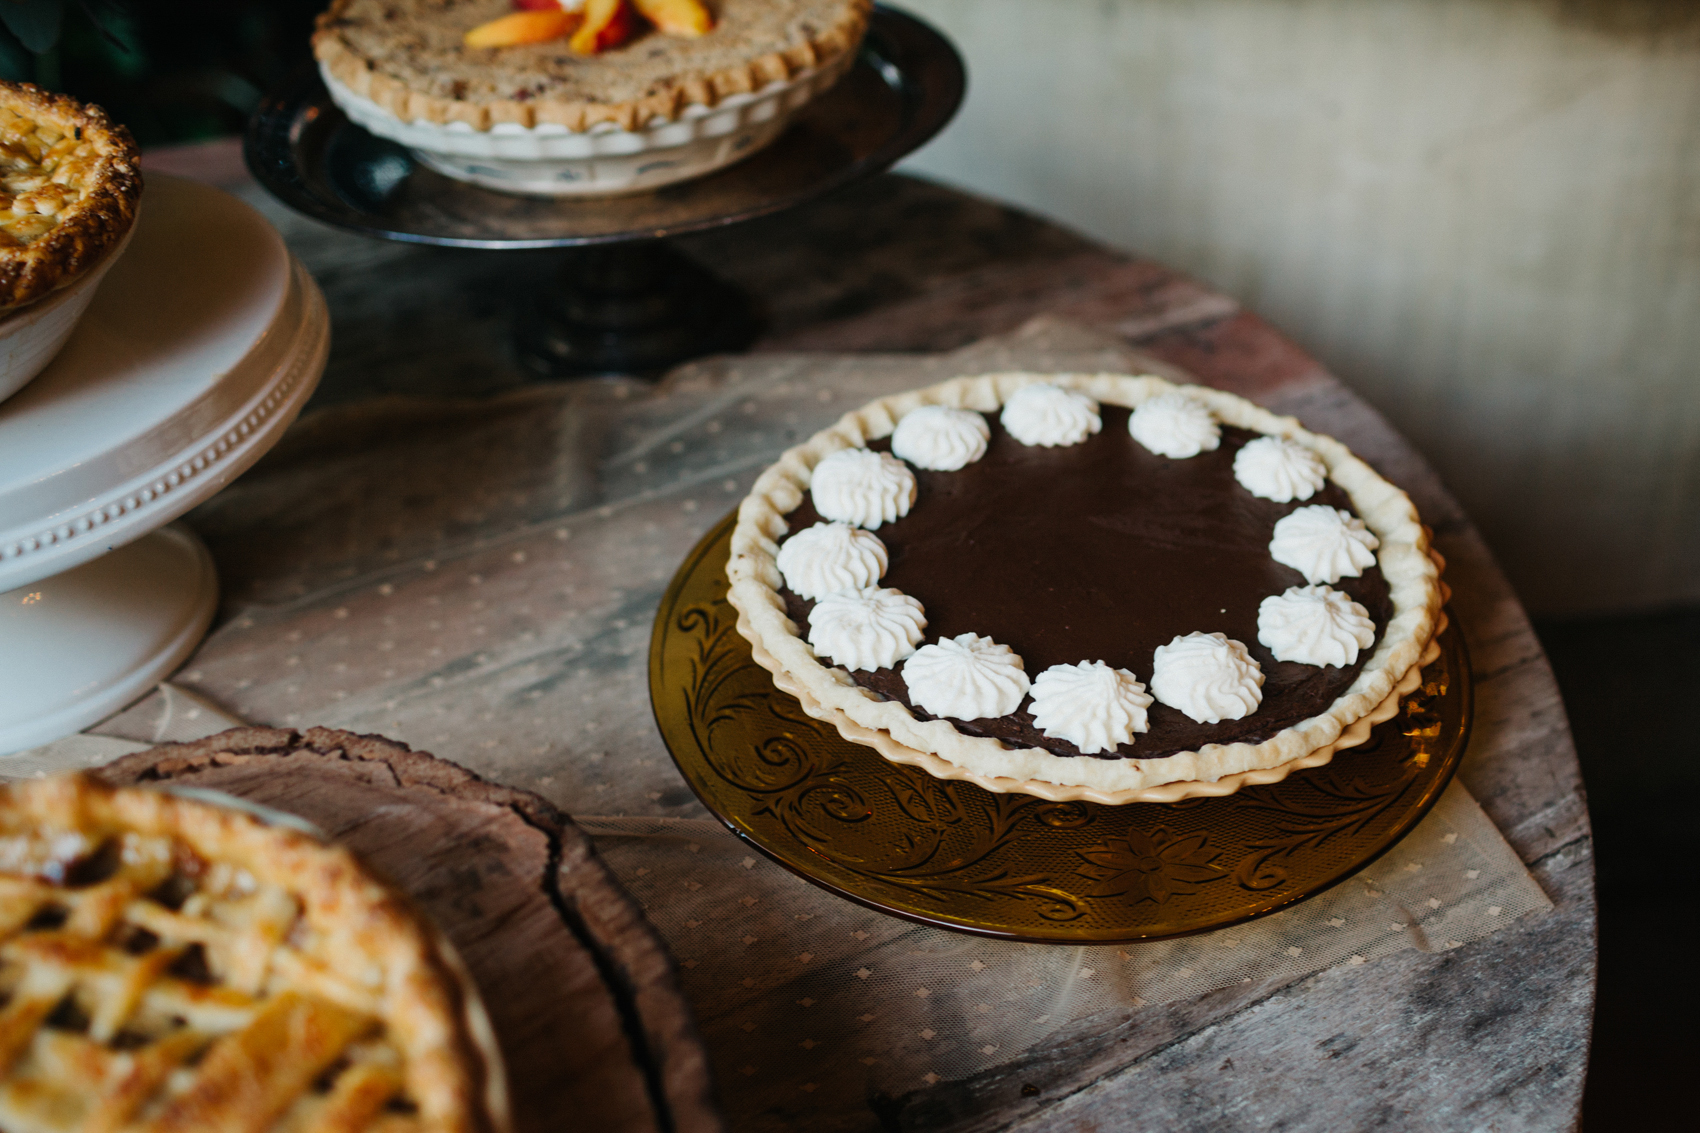 French silk pie by J’aime Cakes for eclectic vintage wedding at Waldo's Secret Garden